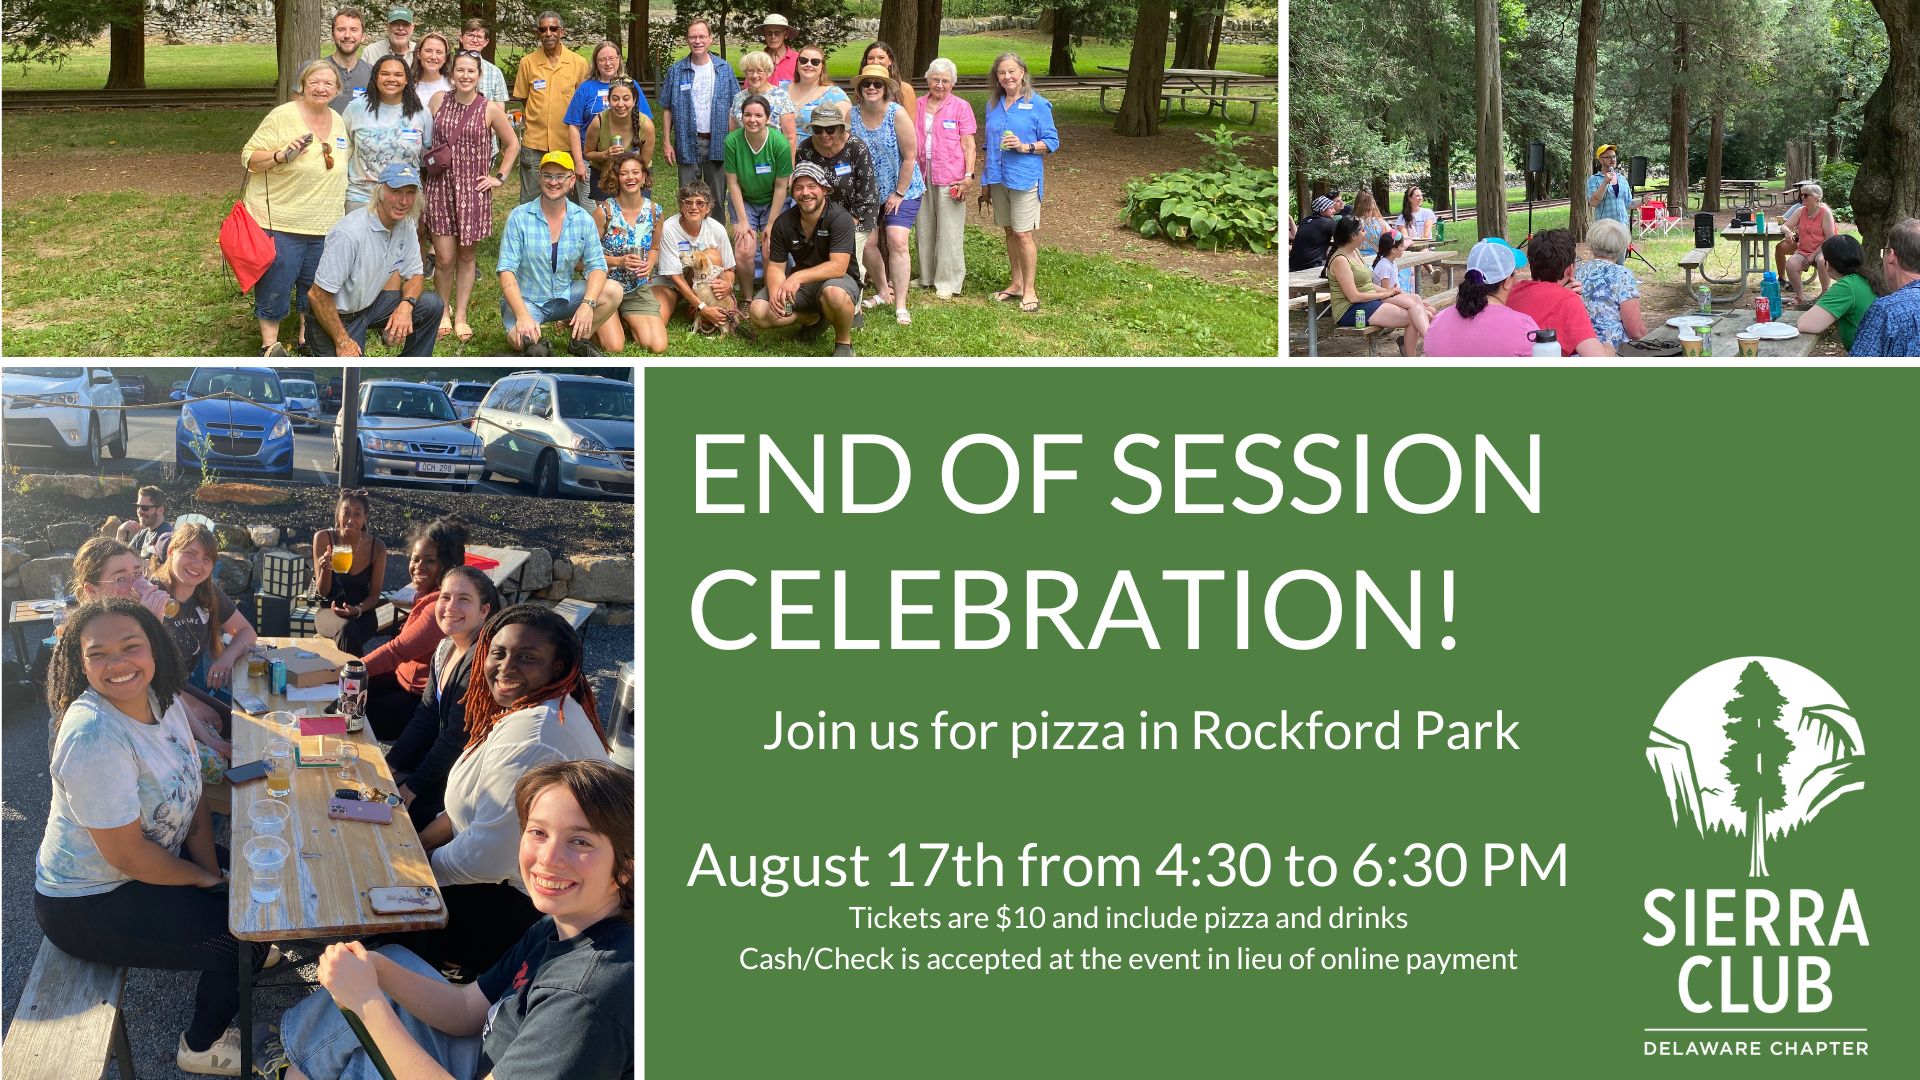 end of session celebration at rockford park on August 17th at 4:30 PM